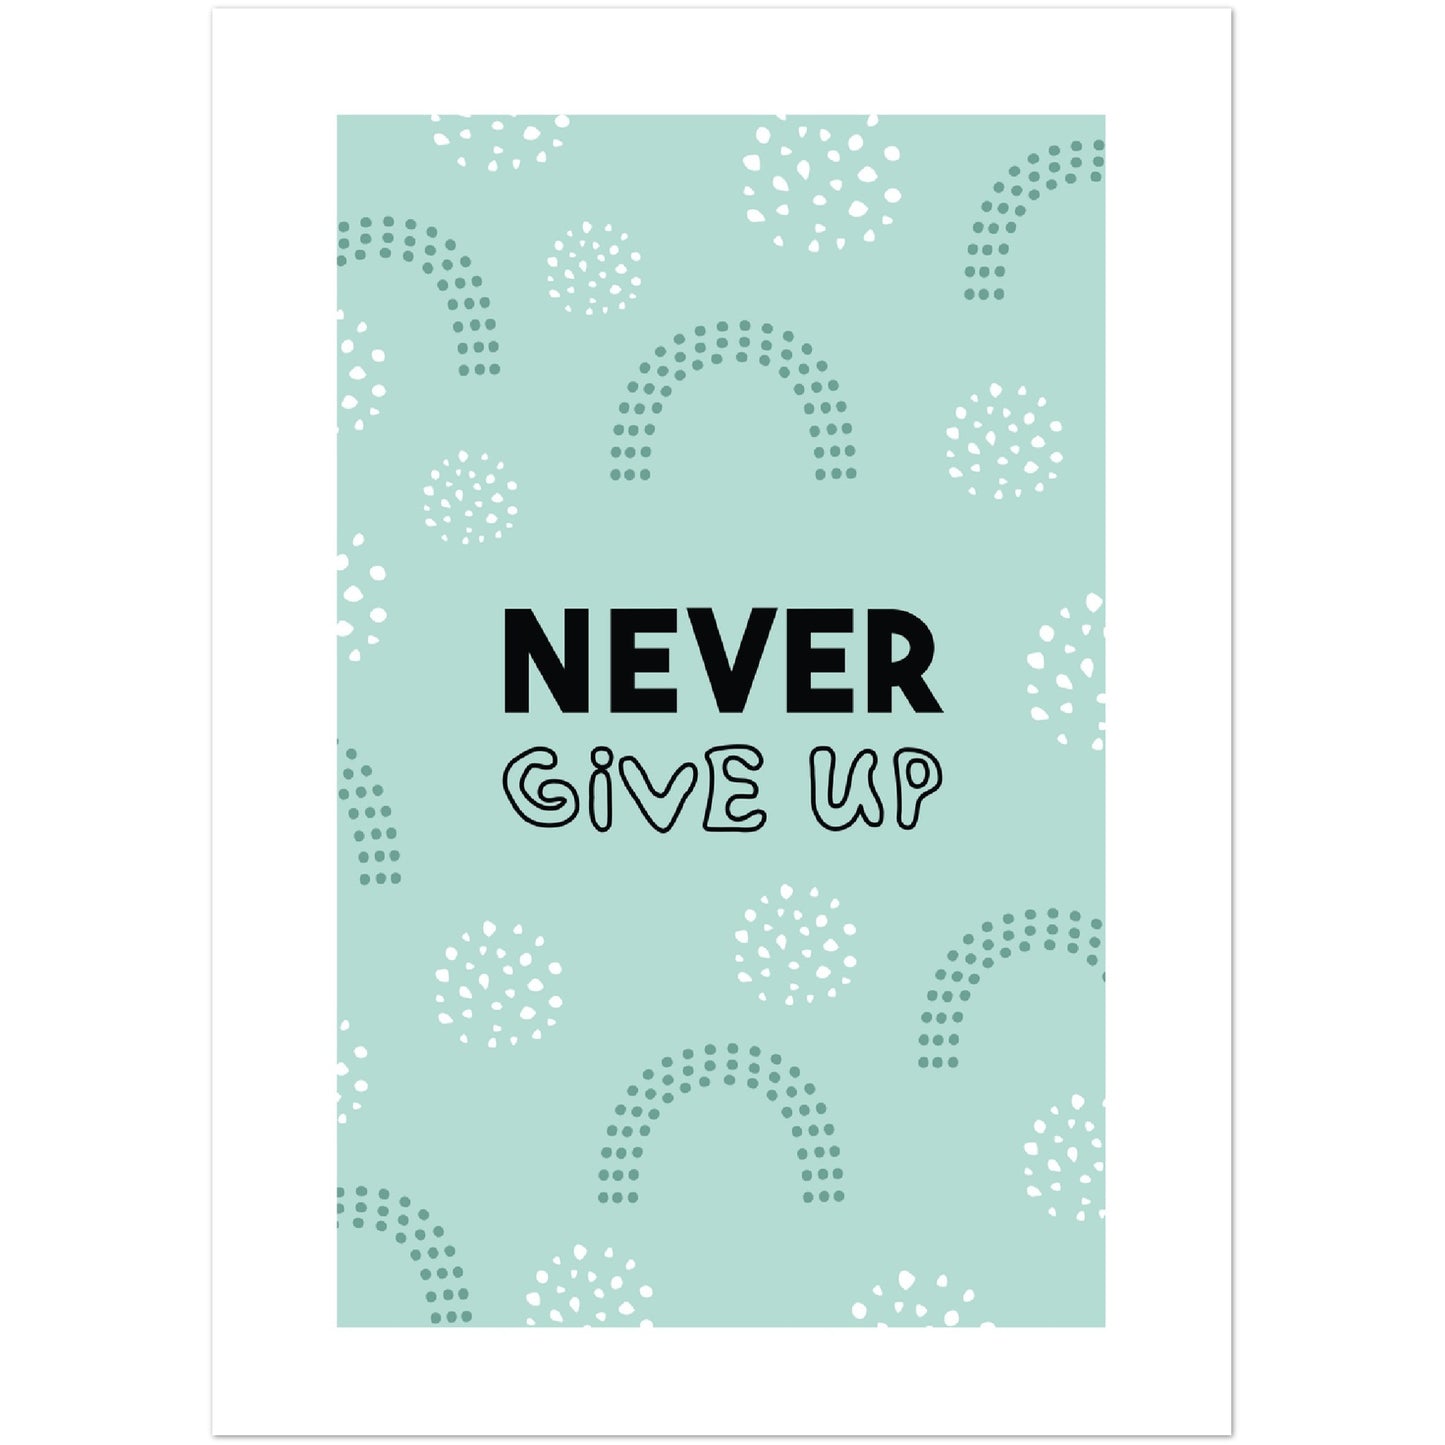 Never Give Up Print